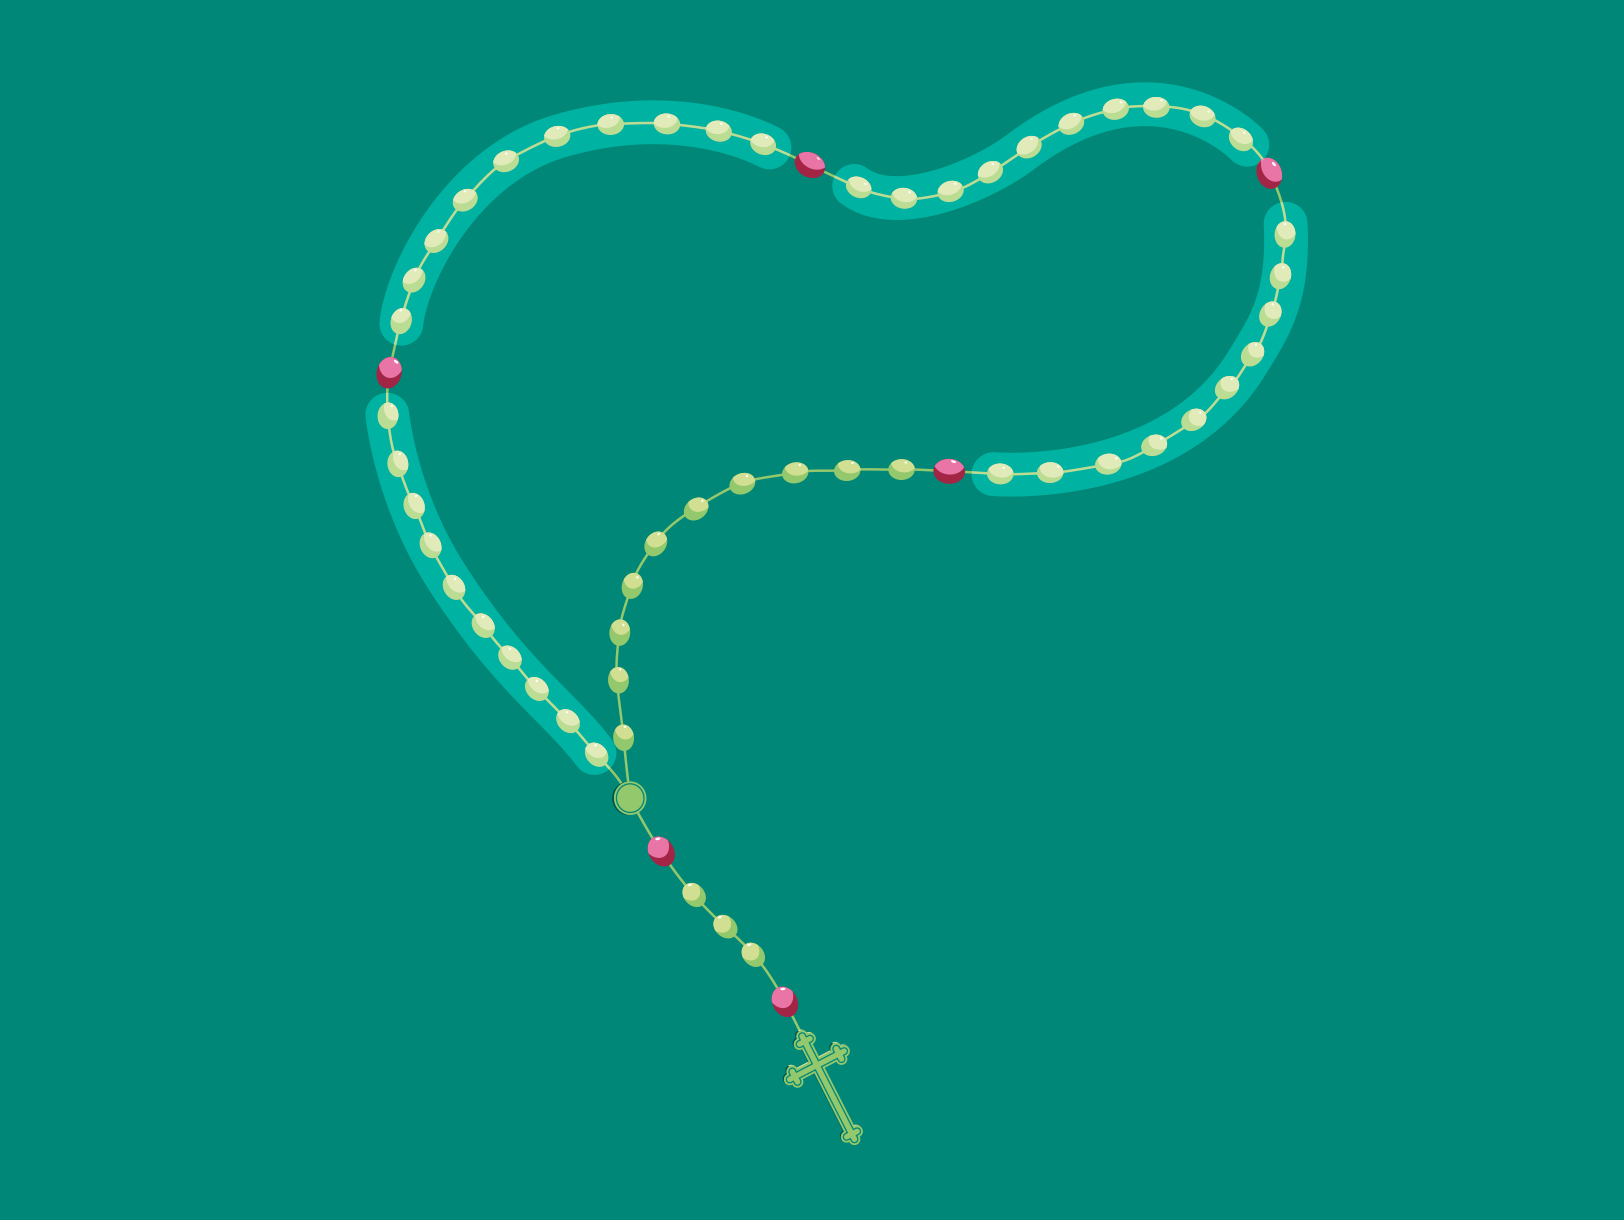 Illustration of rosary beads with the different decades highlighted